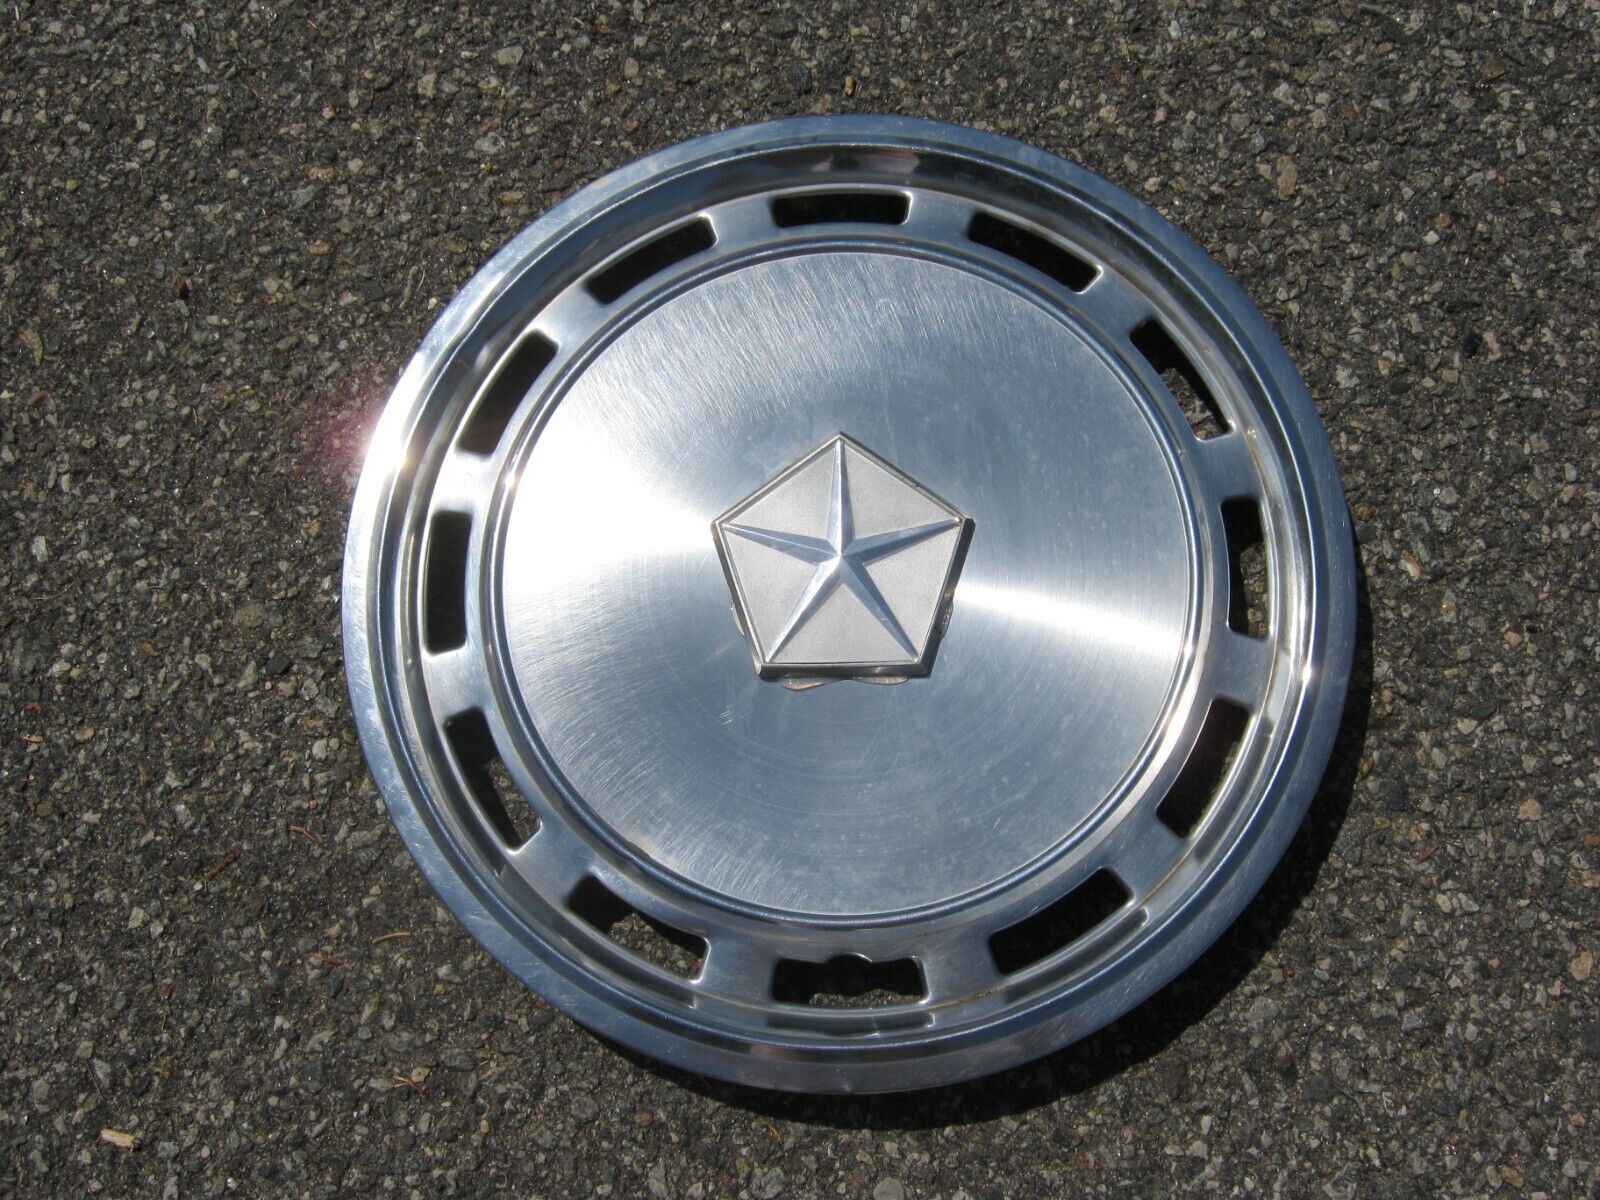 One 1982 Plymouth Reliant Dodge Aries Lebaron 14 inch metal hubcap wheel cover